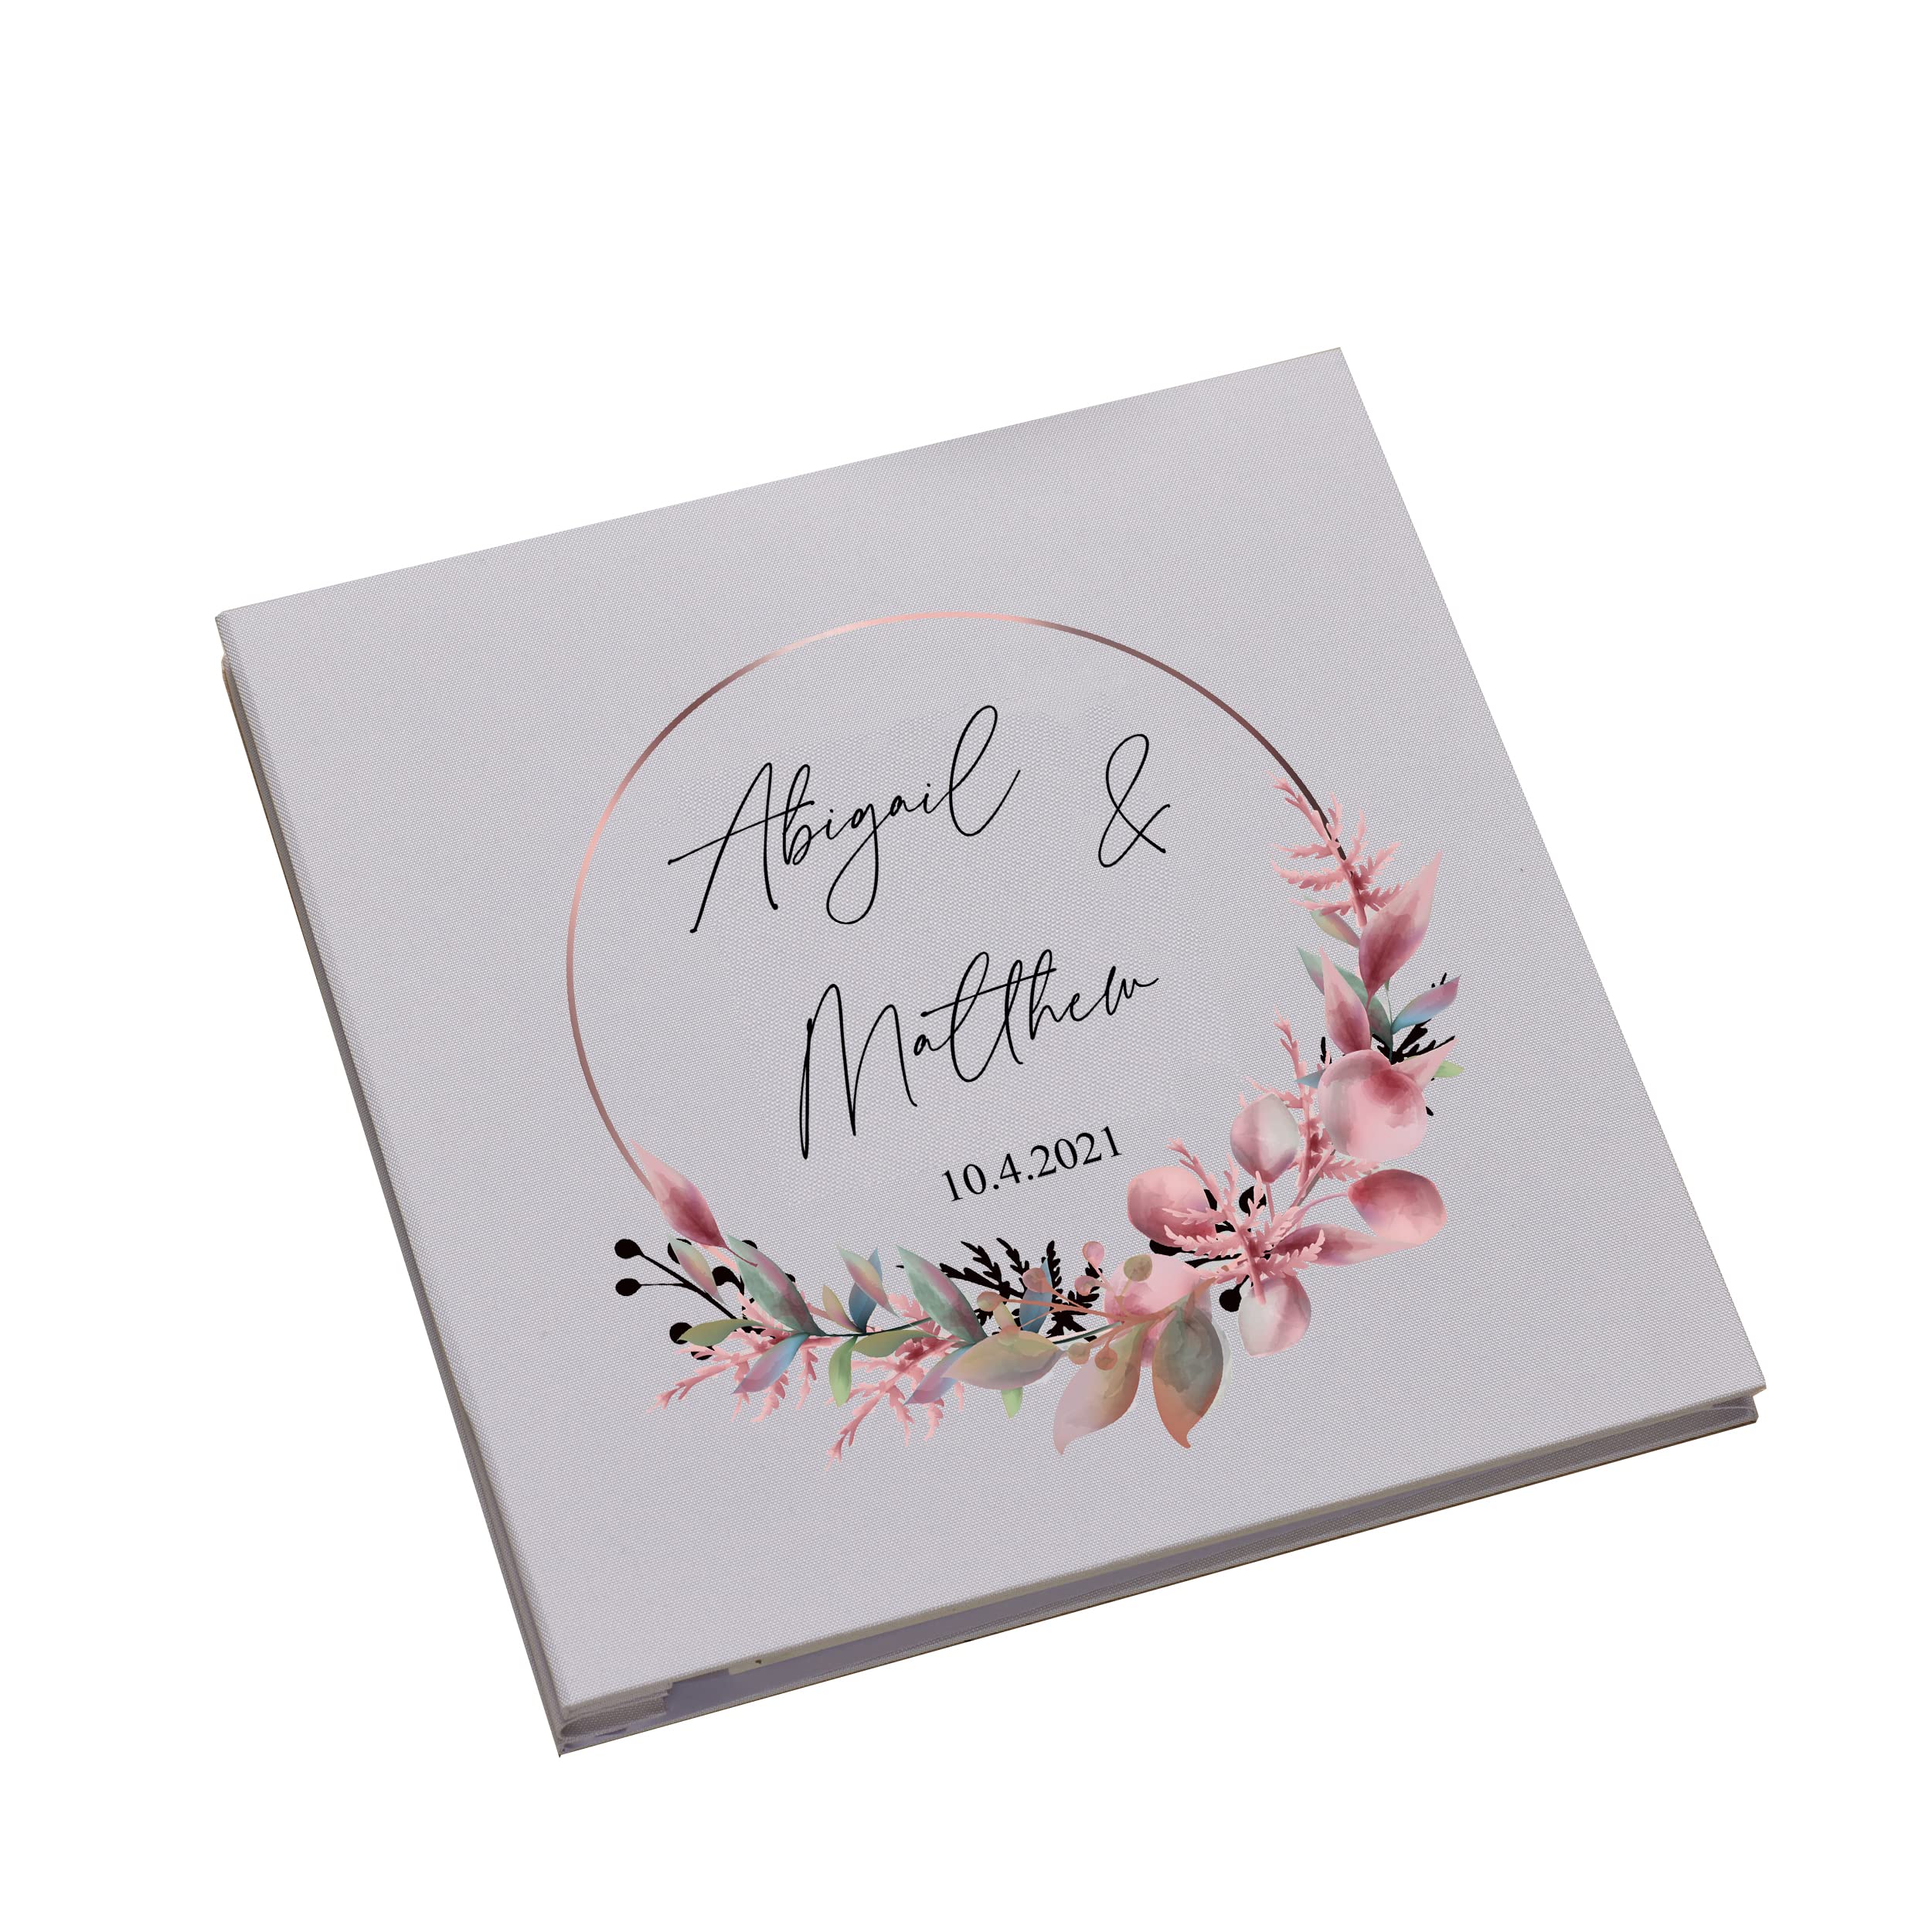 Personalised Large Linen Wedding Photo Album With Floral Wreath